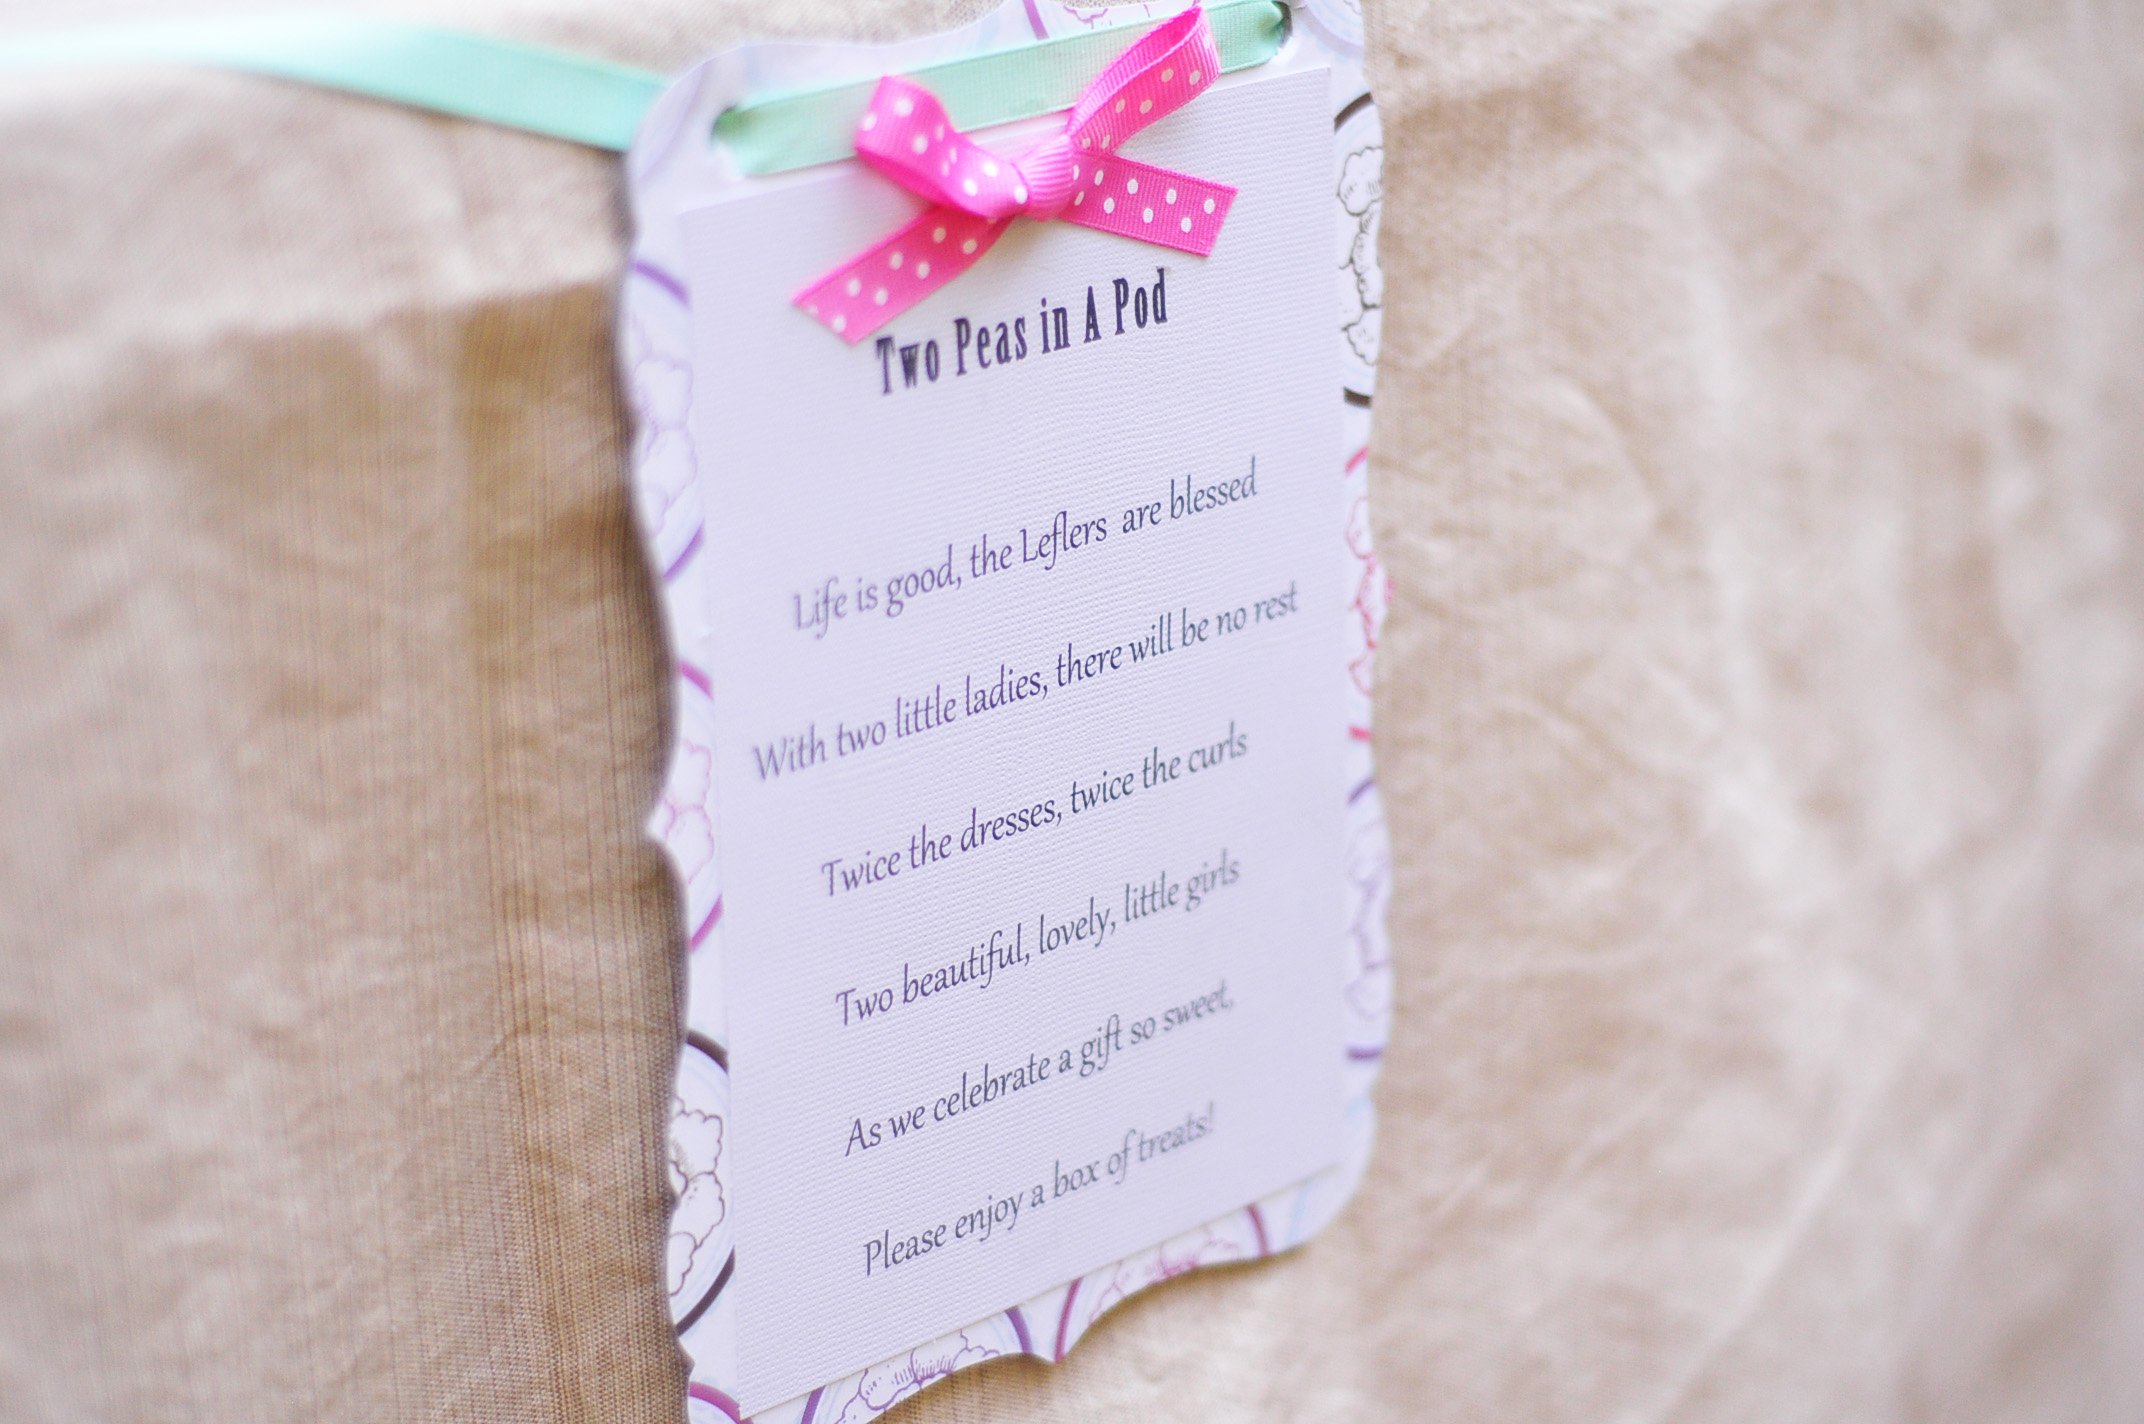 baby shower poems for favors